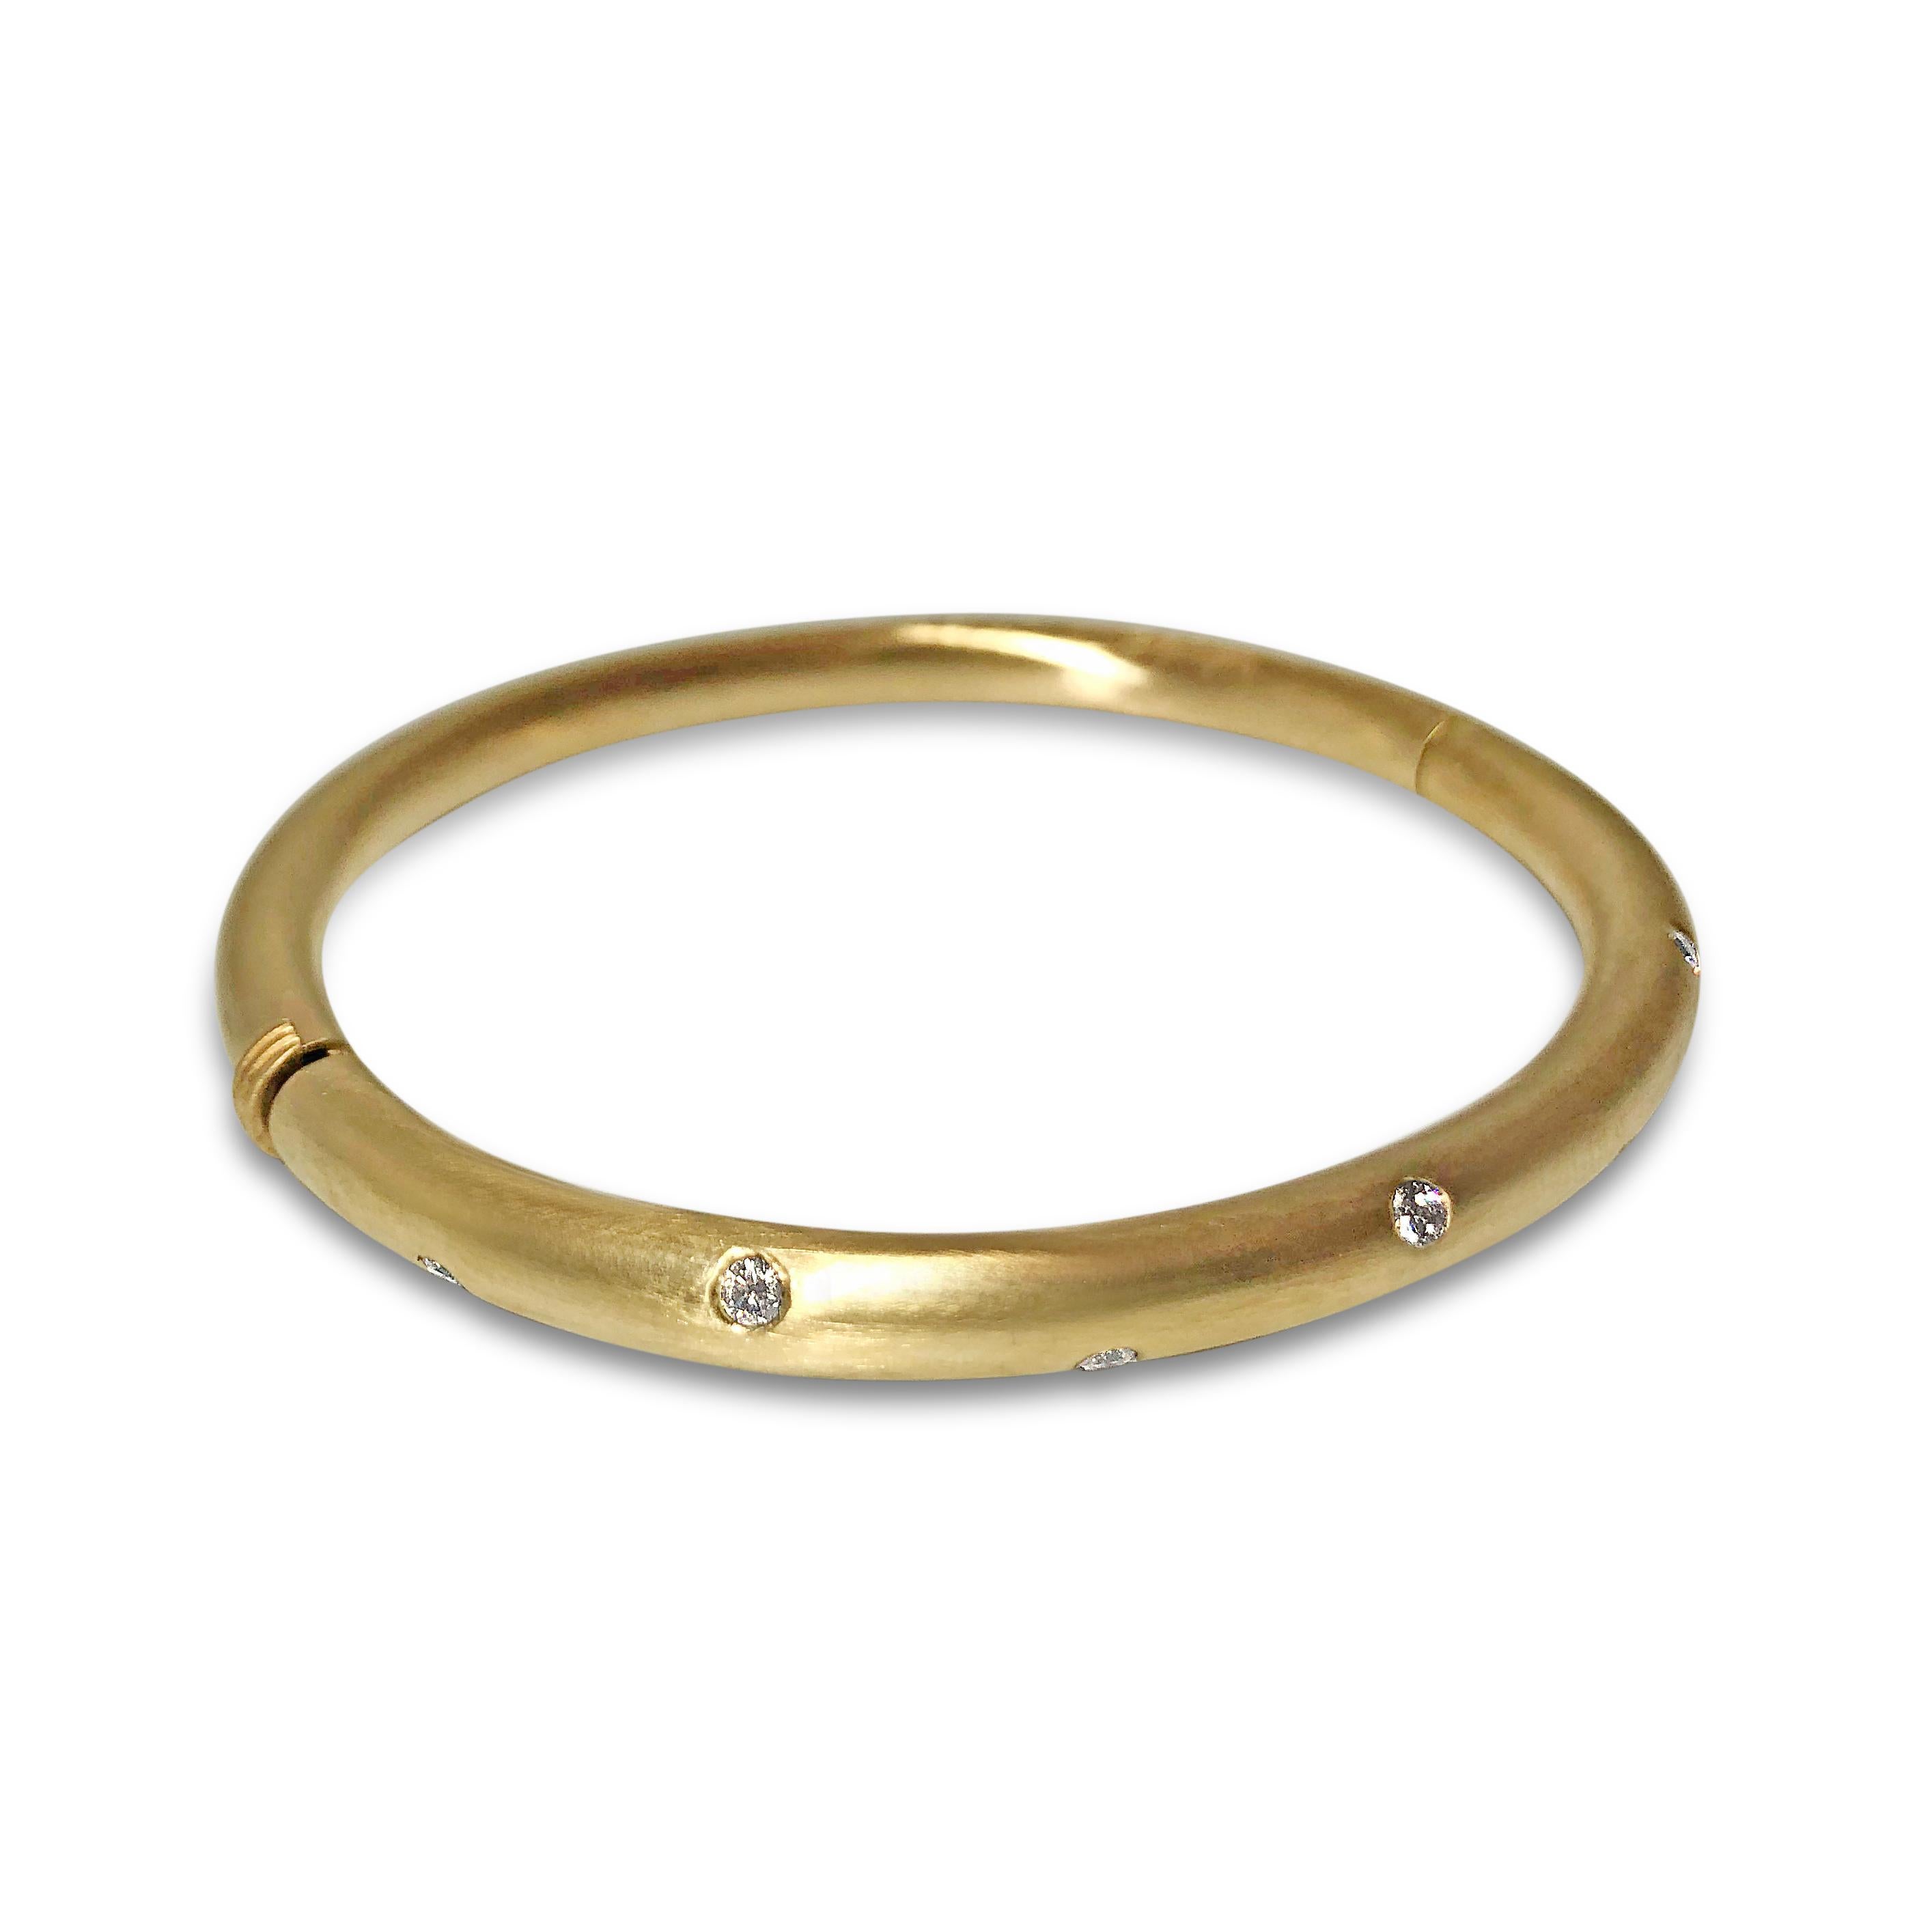 Our ‘T-7’ 14K brushed matte yellow gold bangle dotted with diamonds is a show-stopper. The 3/16 inch bracelet features seven round 2.3mm white diamonds, totaling 0.37ct. The bangle securely closes with a snap & hinge.

Specifications:
- Stone(s):